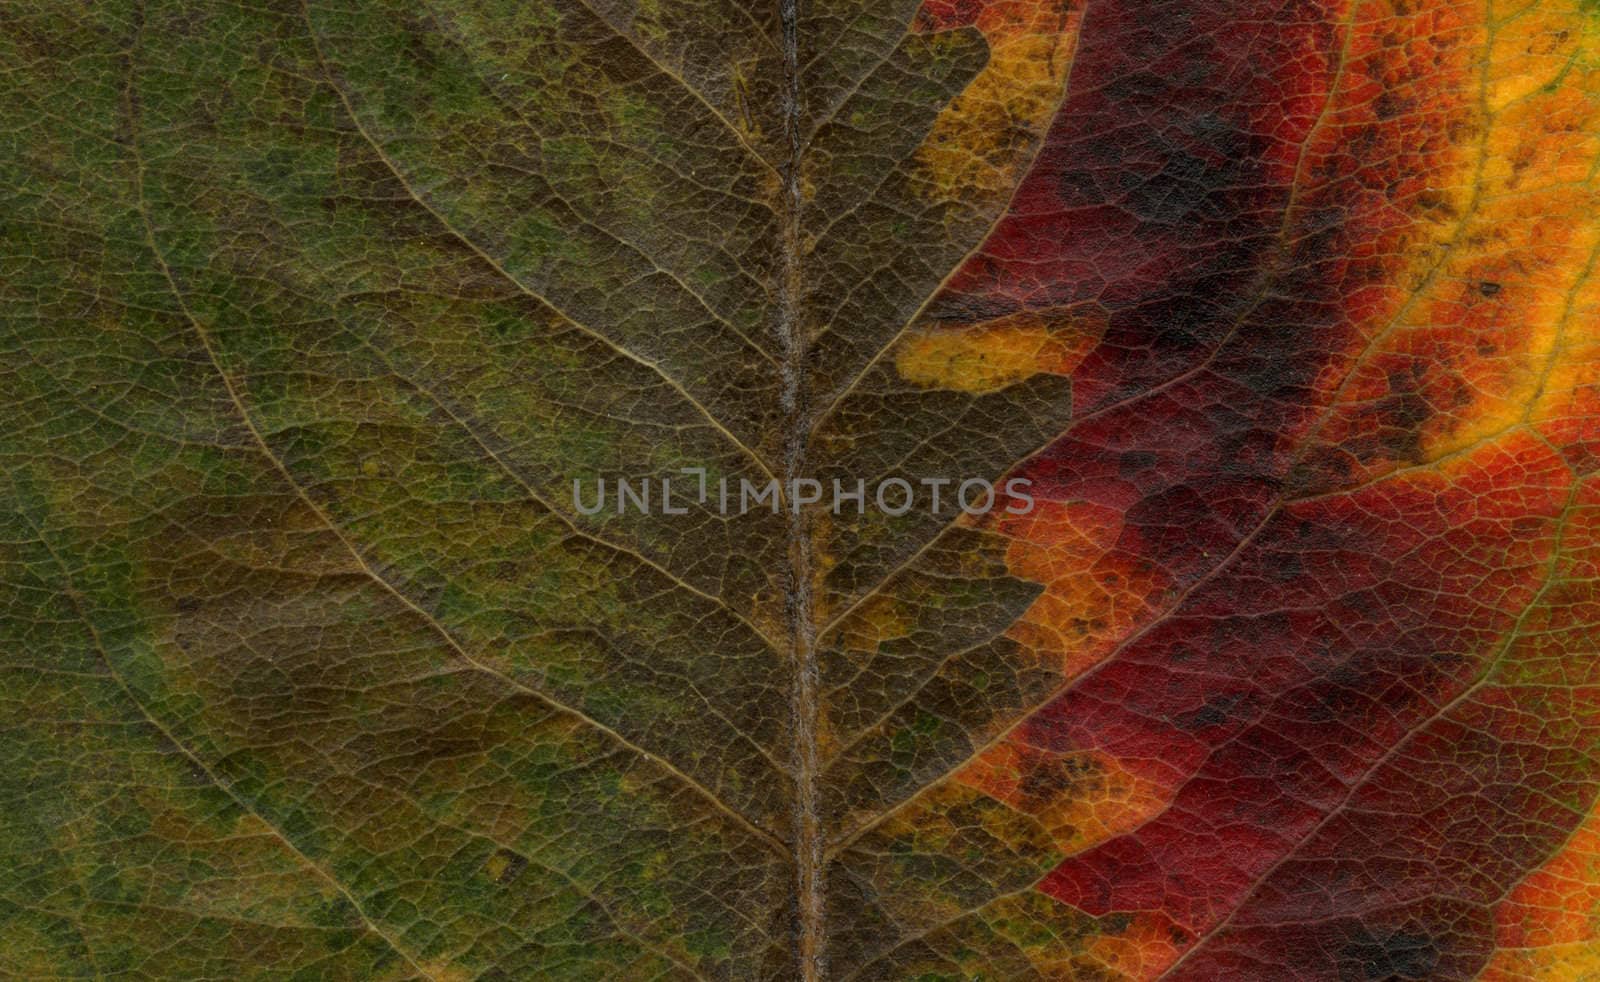 from green to red - leaf abstract by PixelsAway